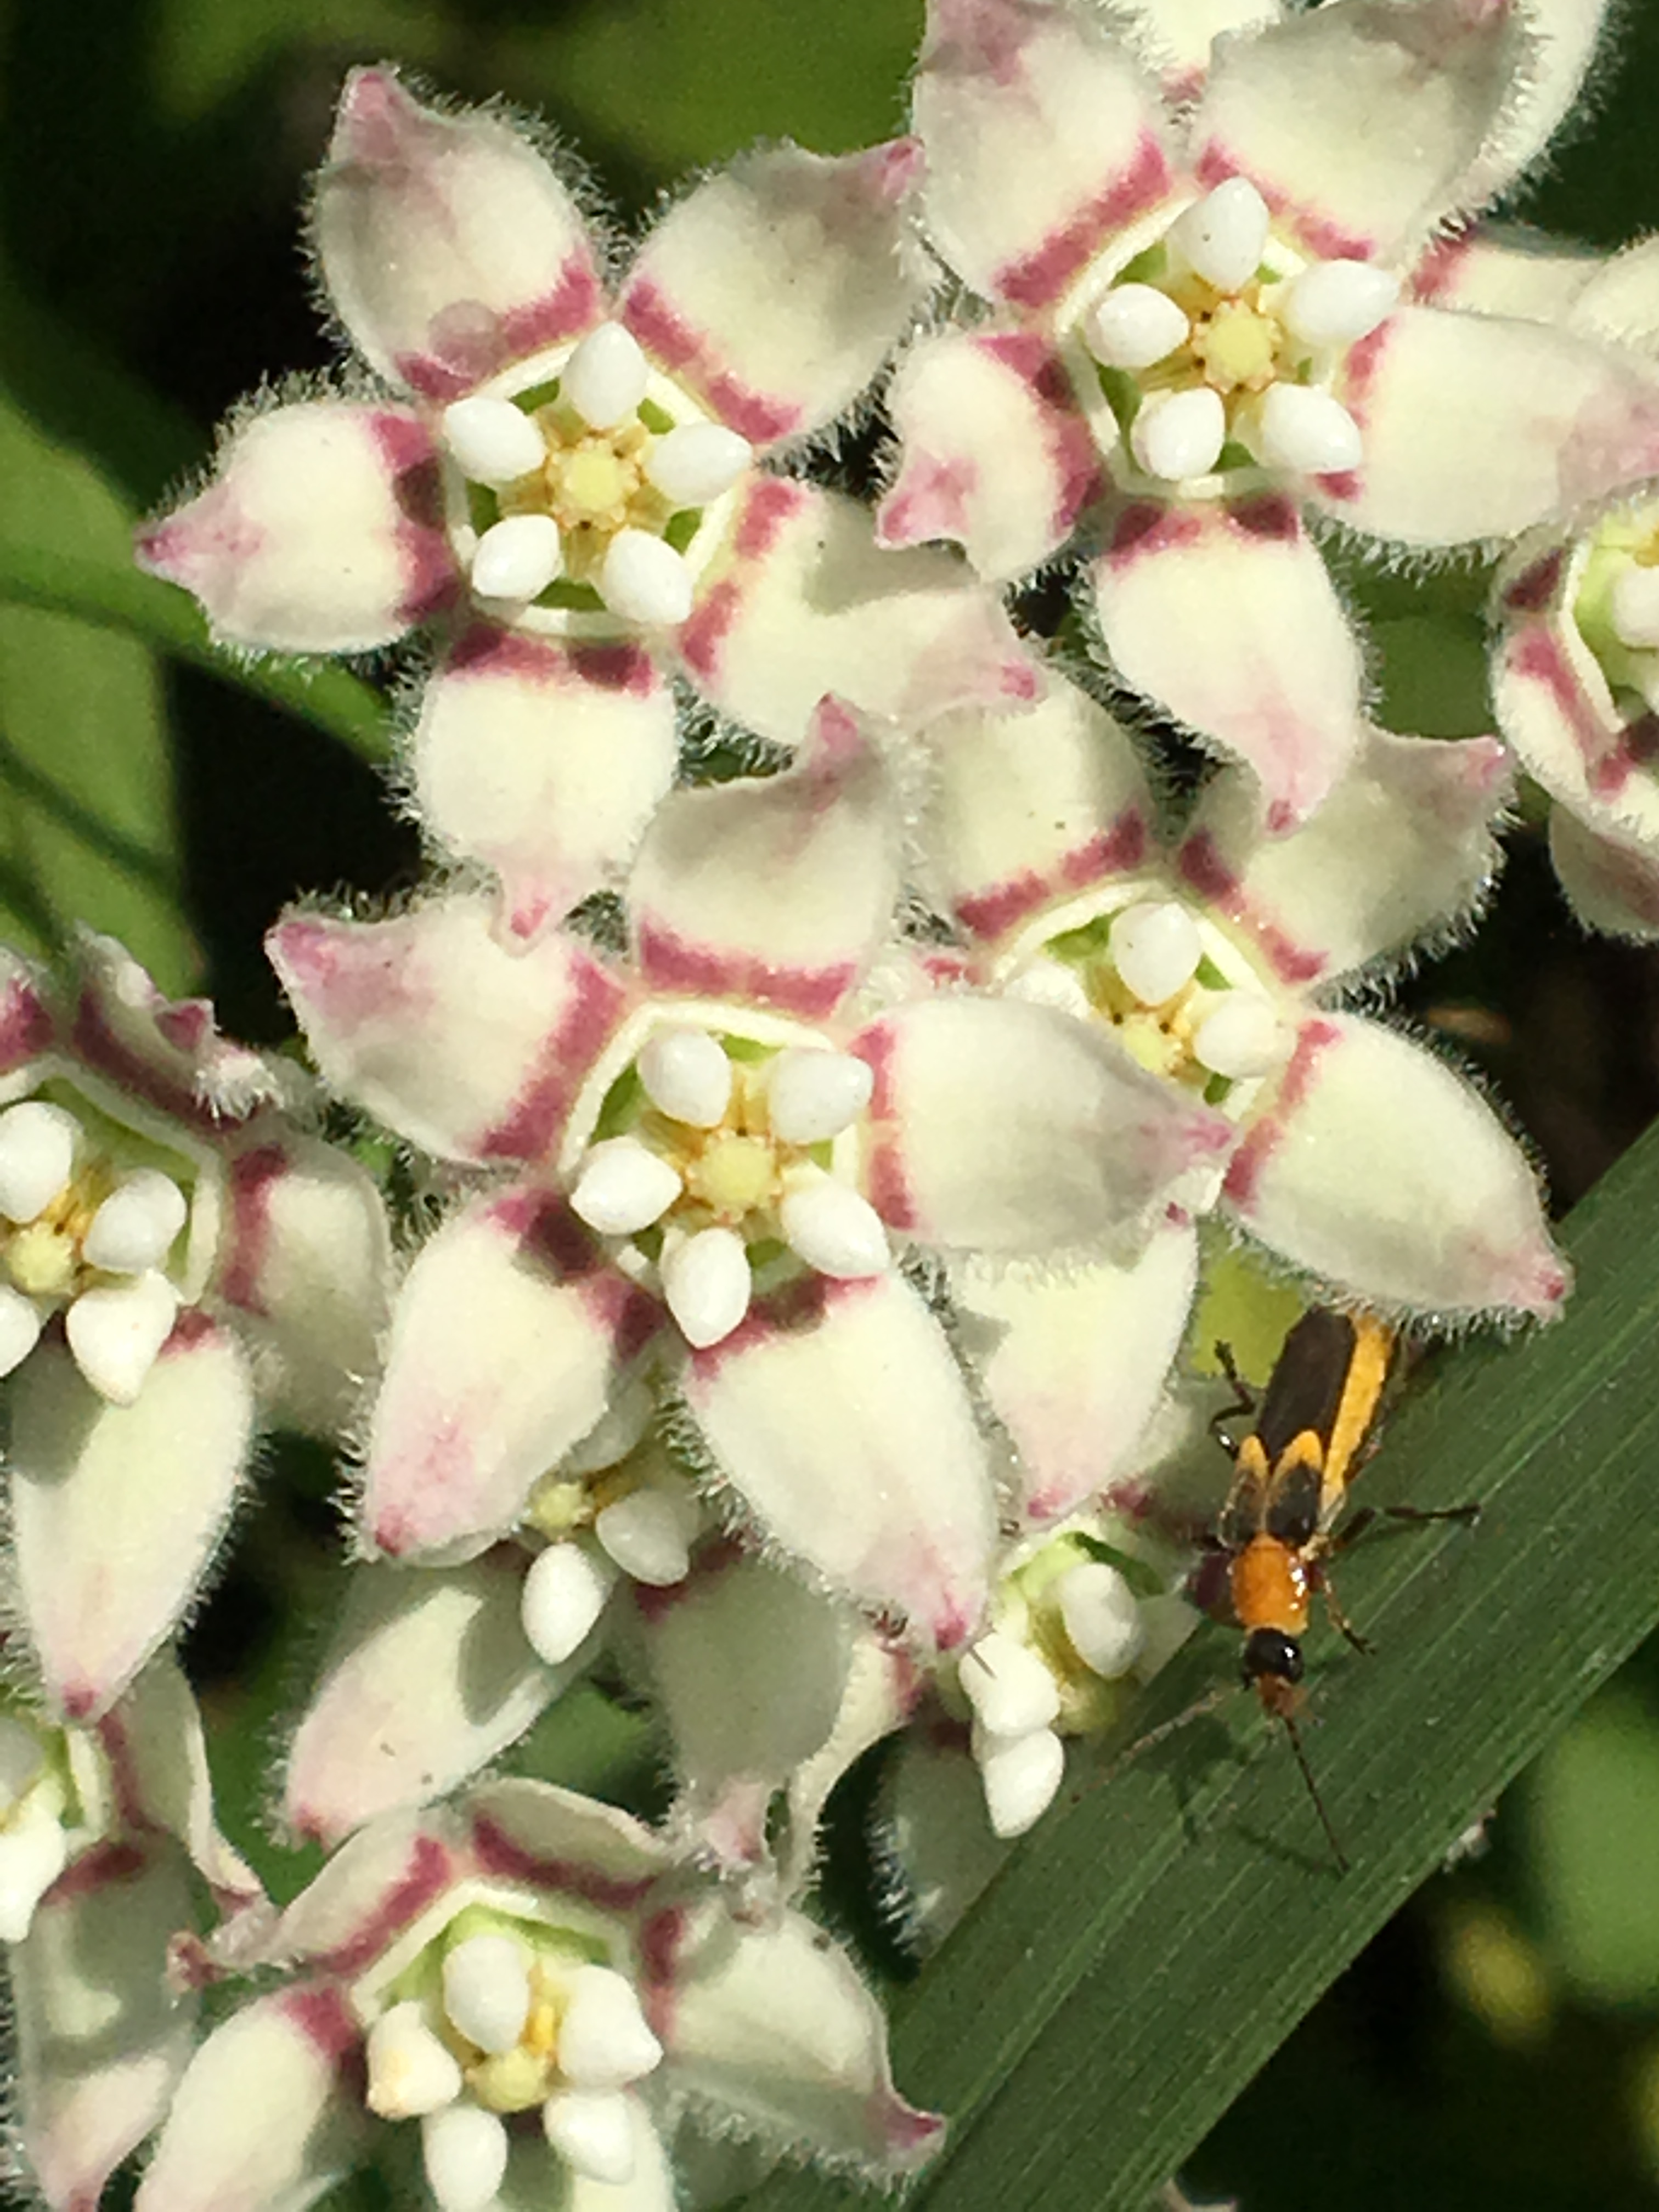 Beautiful, multi-layered, white and pink blossoms have an unusual look. Perched on one of the plant's leaves is an orange beetle.